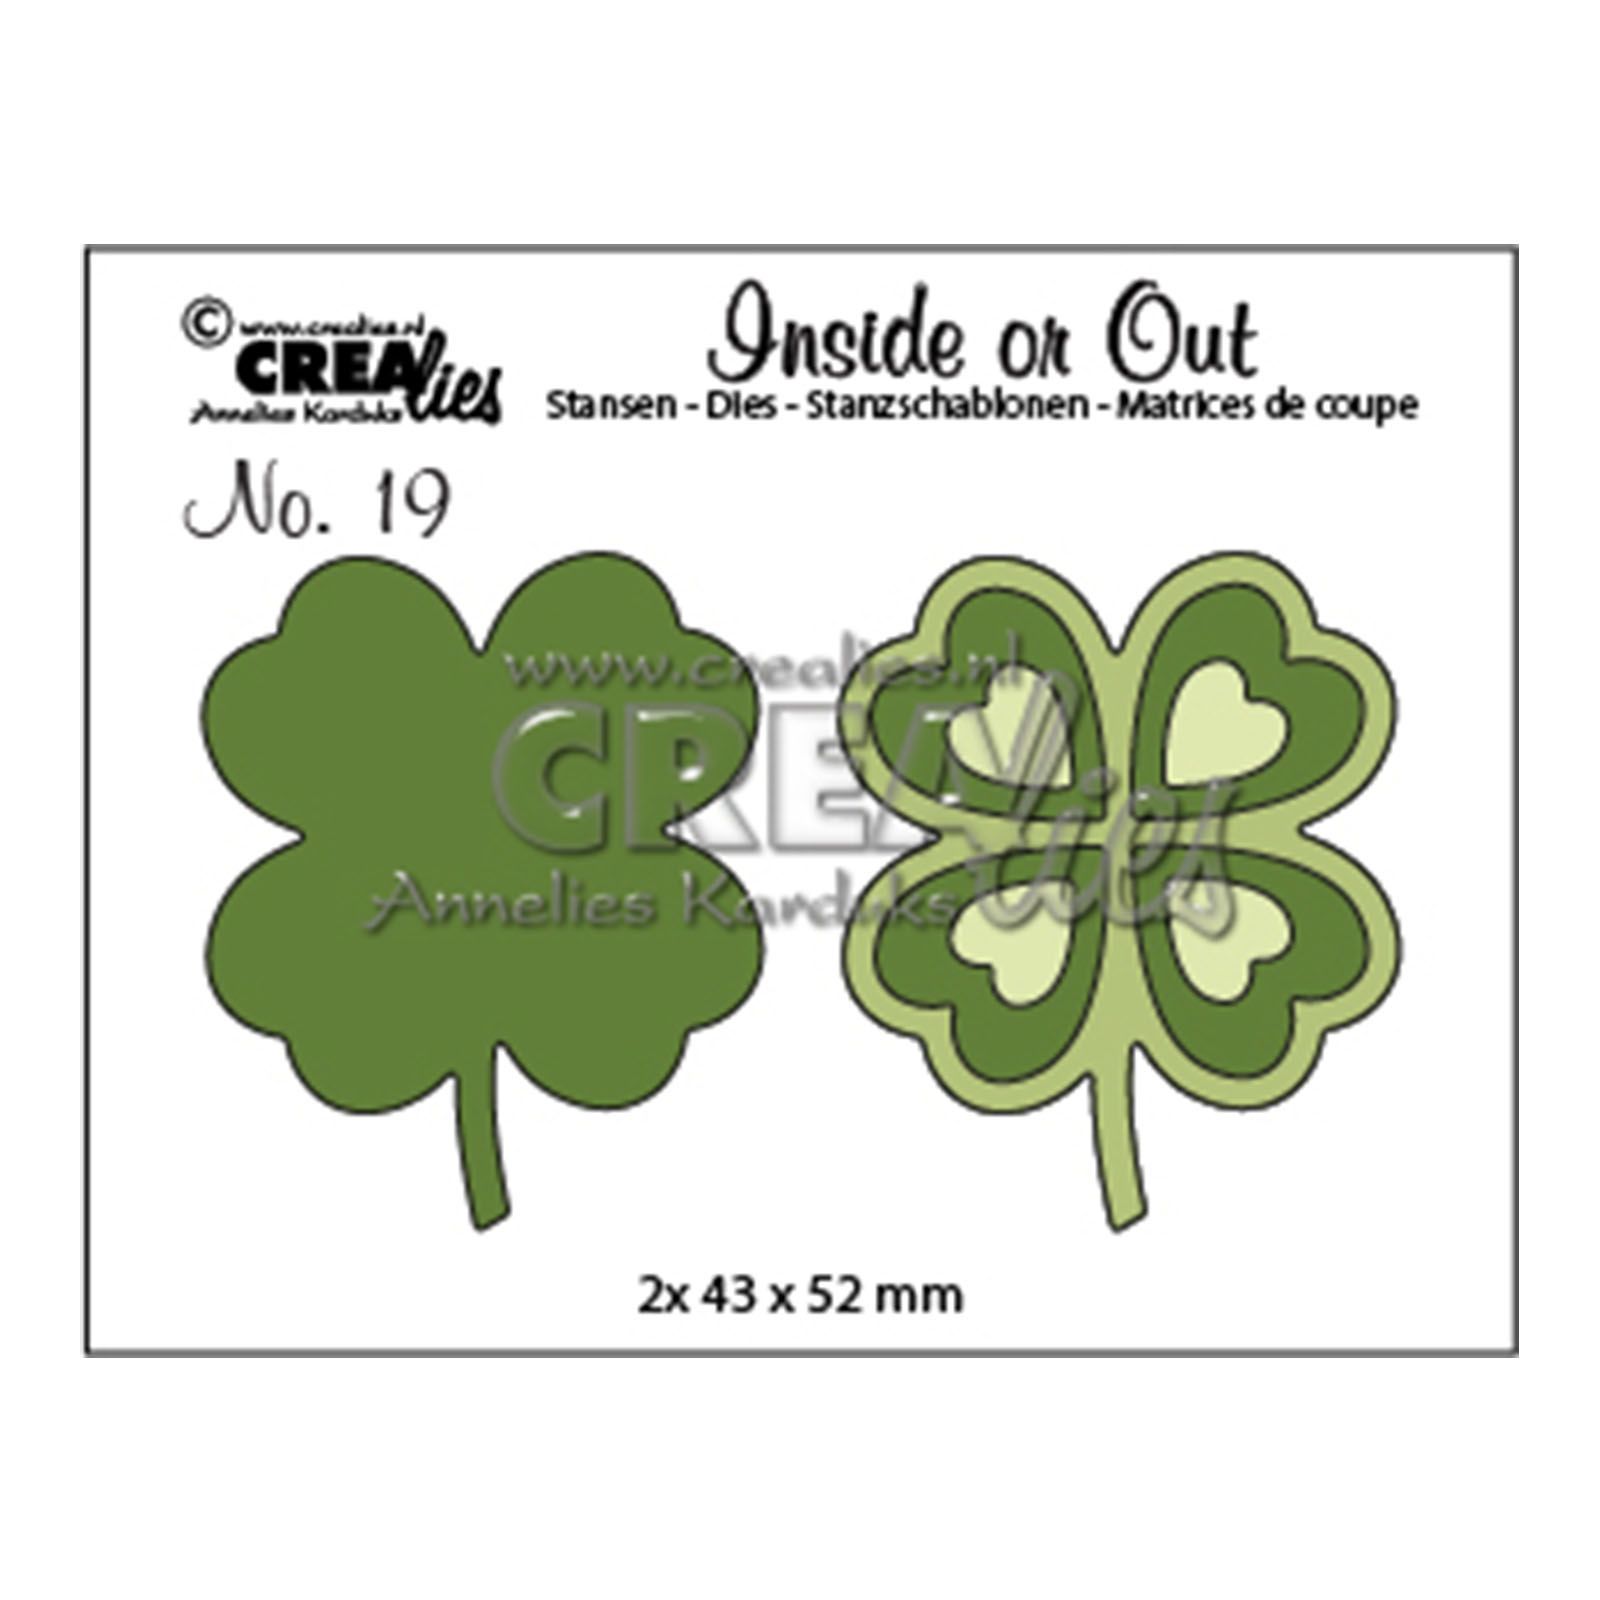 Crealies • Inside or Out dies Lucky clover